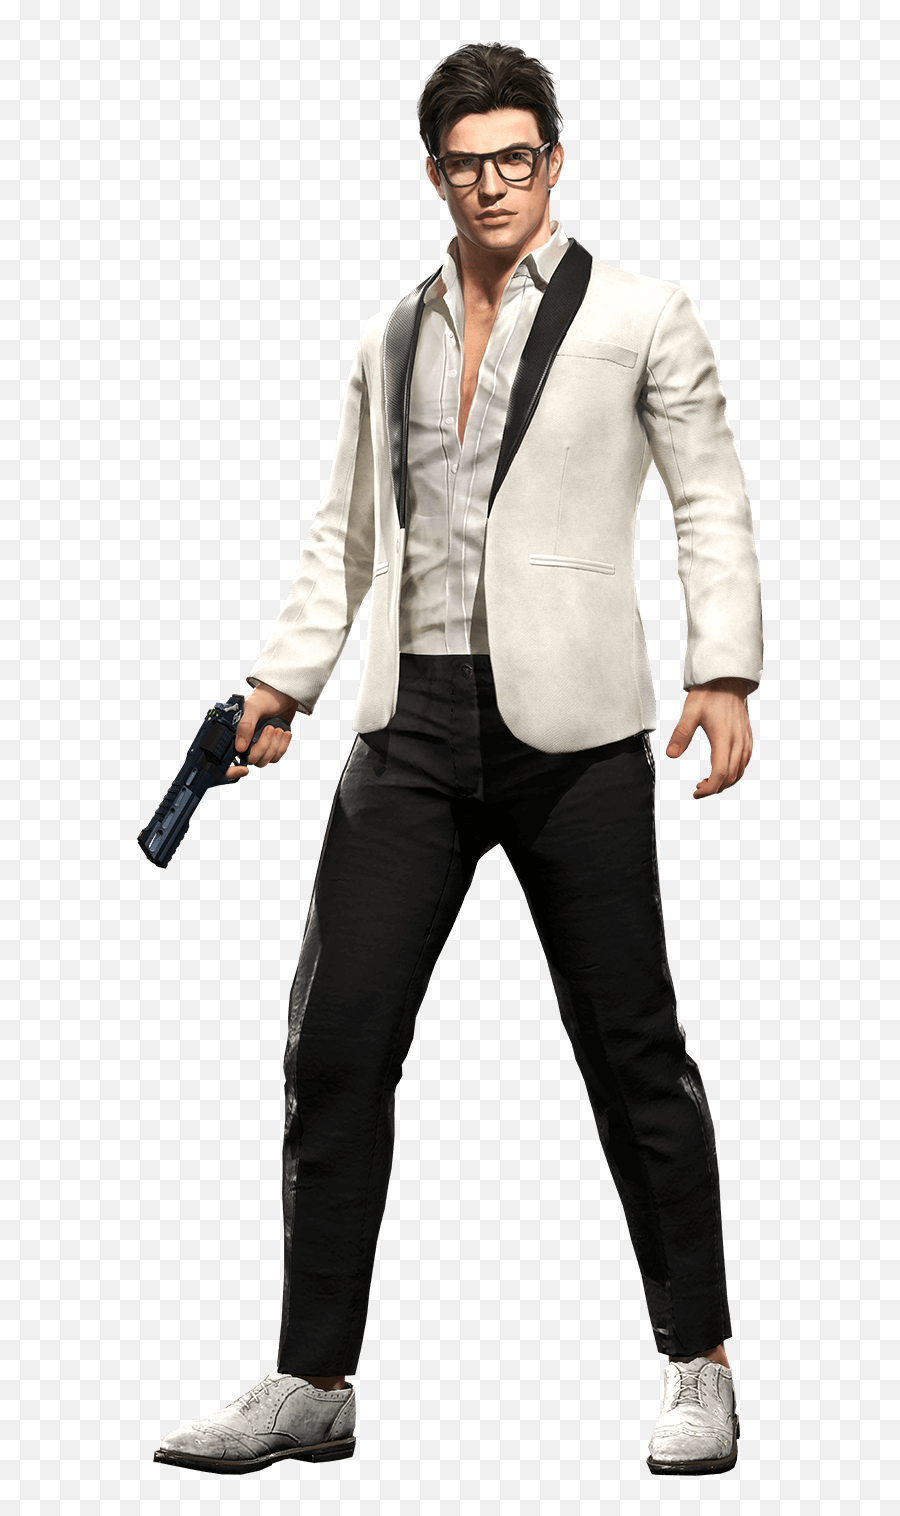 Pubg Character Png - Formal Wear 2359620 Vippng Transparent Pubg Character Png,Pubg Character Png